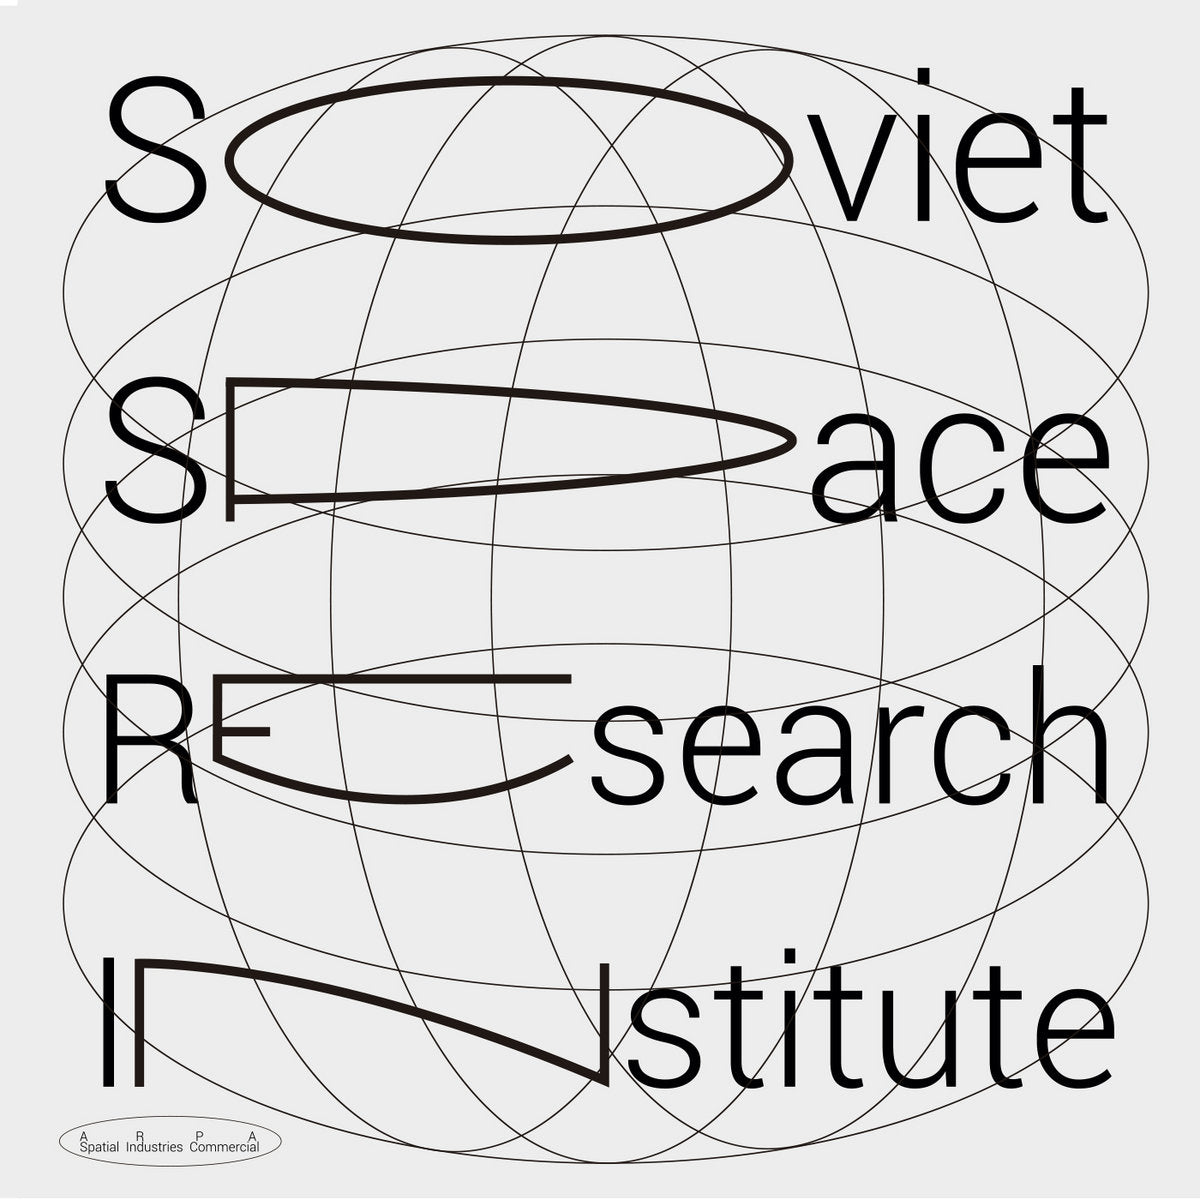 Soviet Space Research Institute – ARPA Spatial Industries Commercial